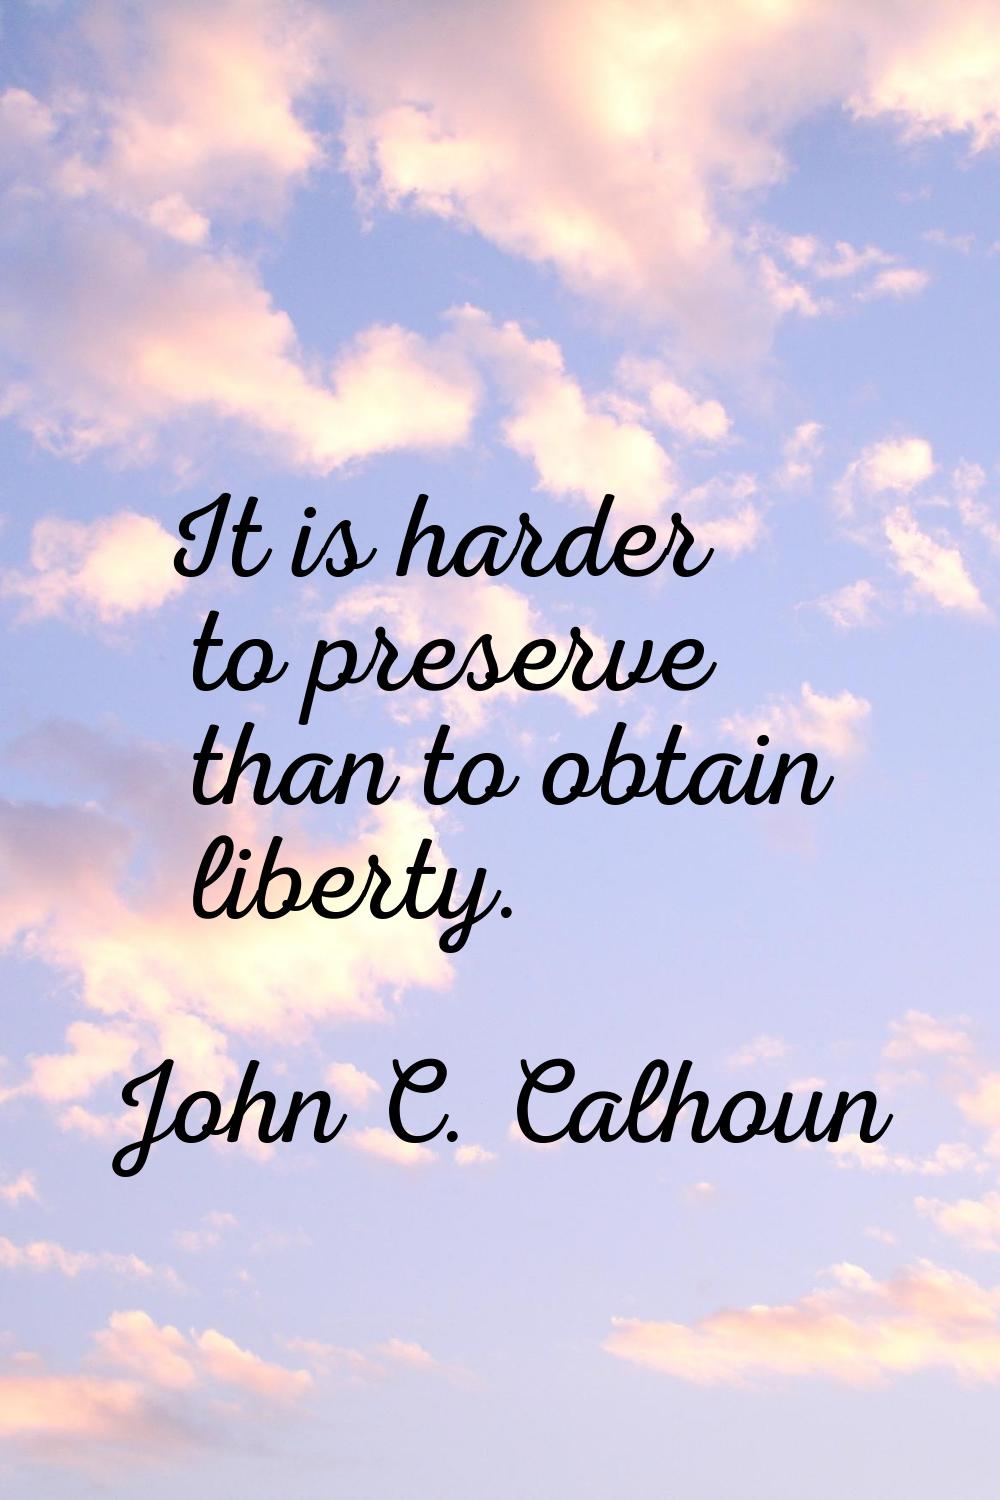 It is harder to preserve than to obtain liberty.